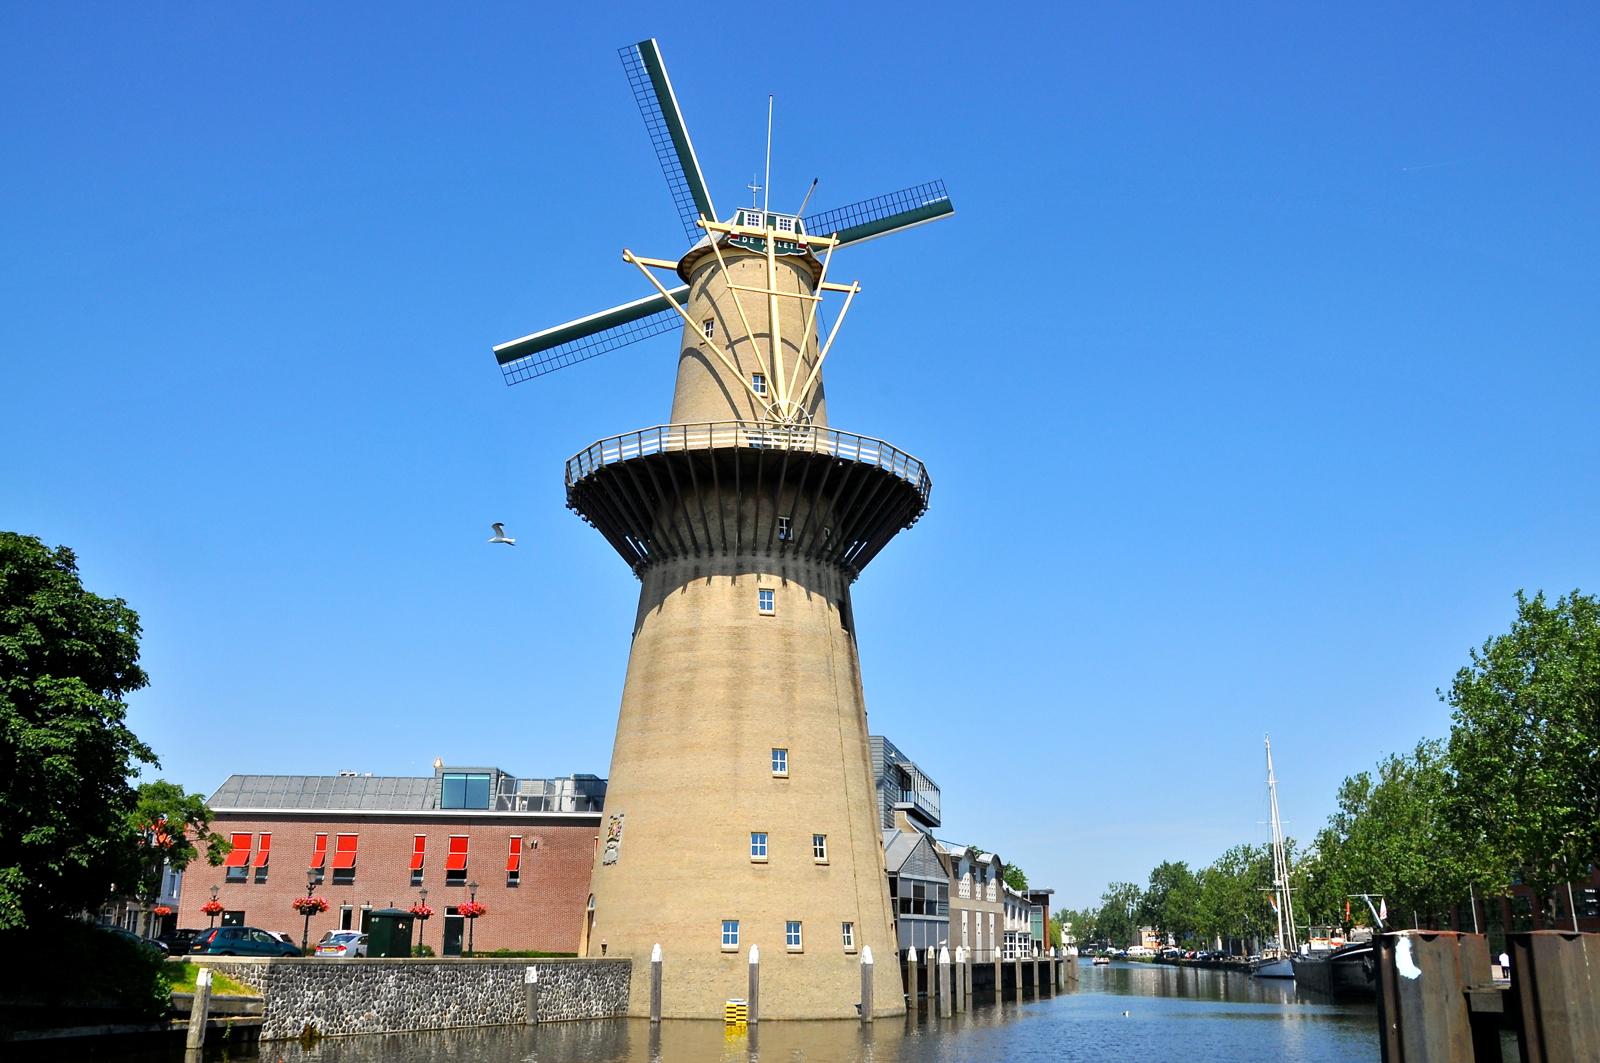 The windmill at Schiedam, considered to be the world's tallest